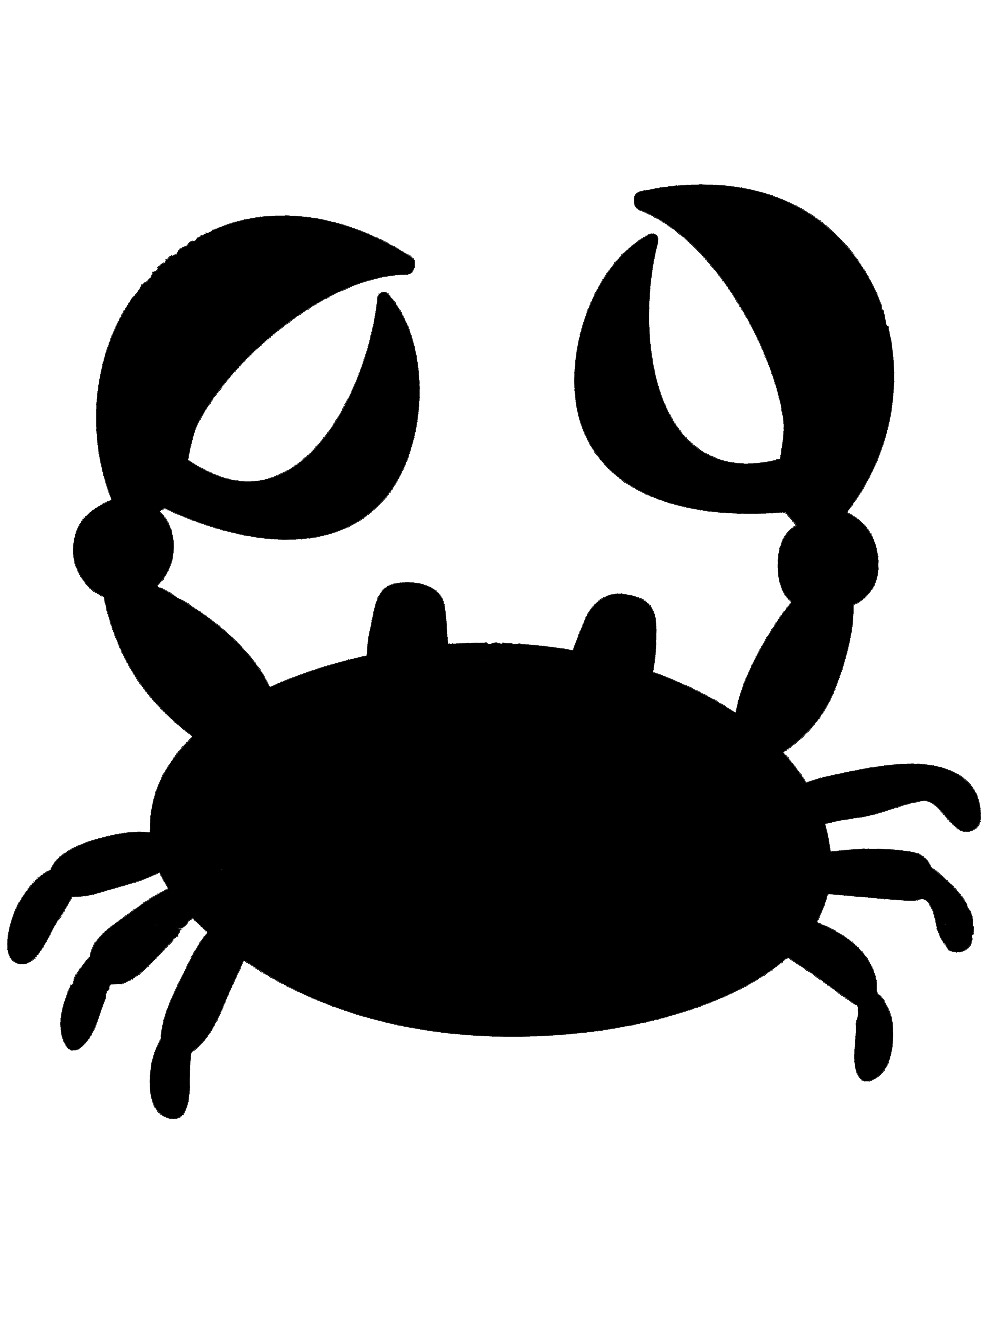 Free Printable Crab Stencils And Templates